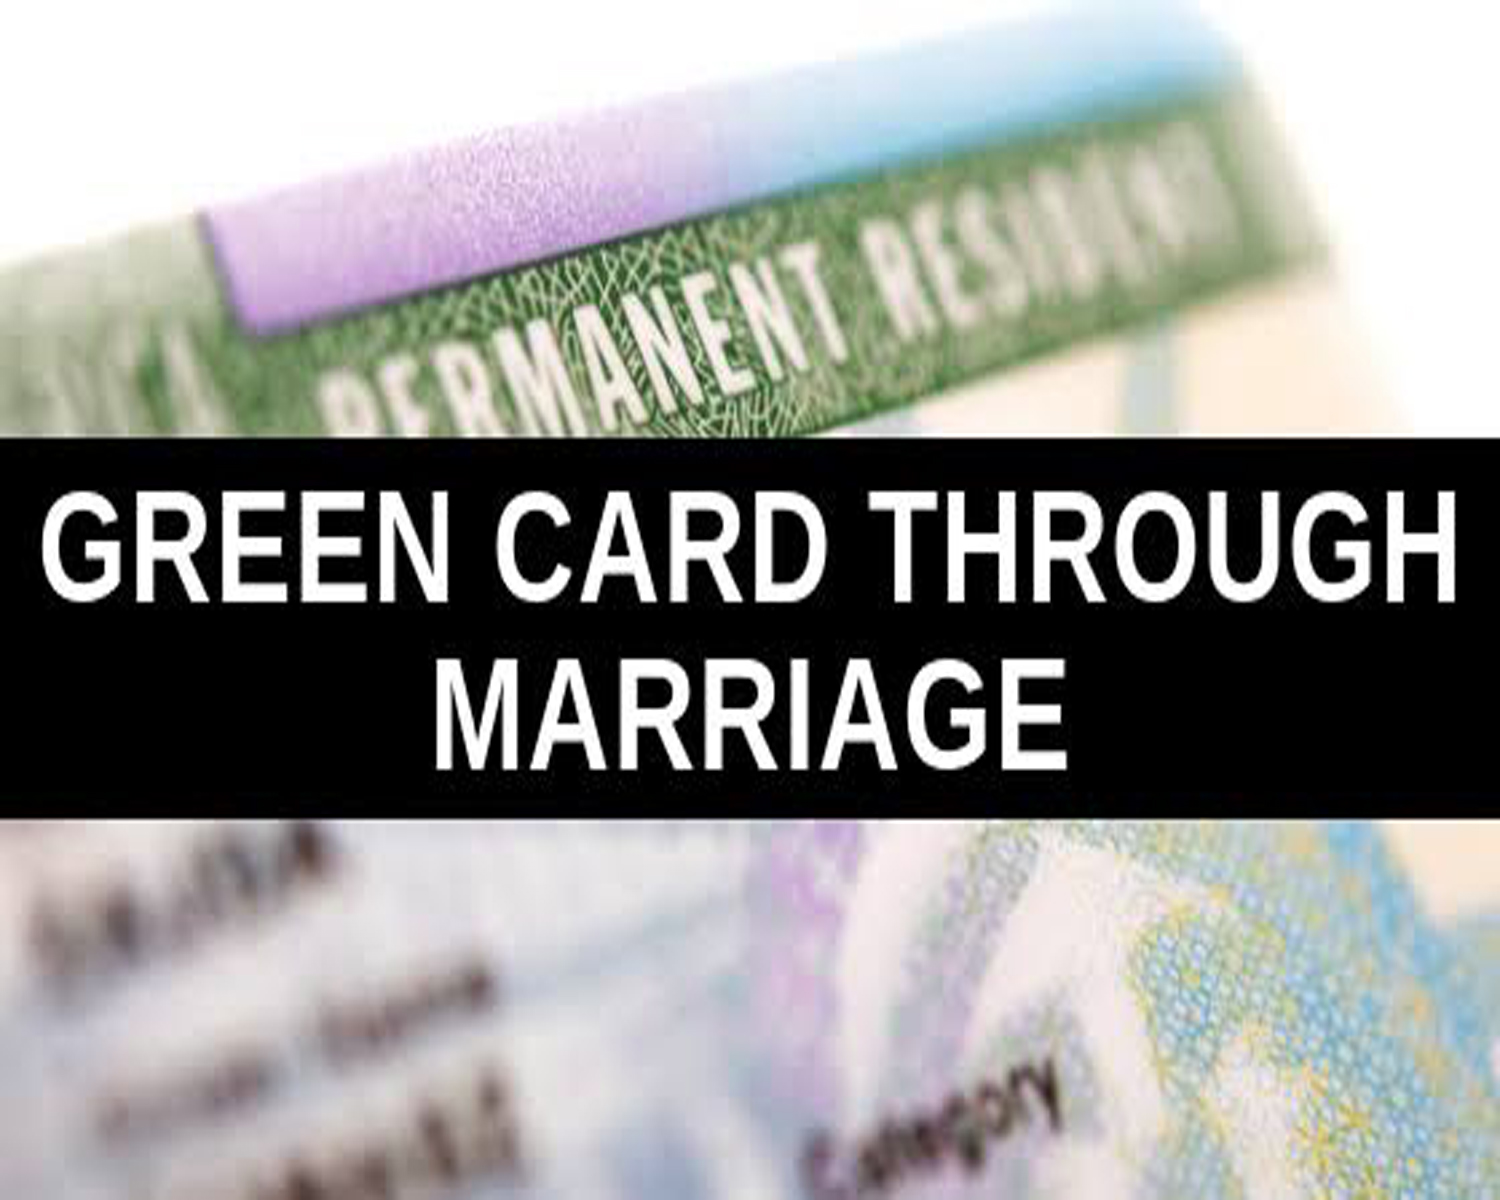 What Documents Do We Need for a Marriage Green Card? Canada, US